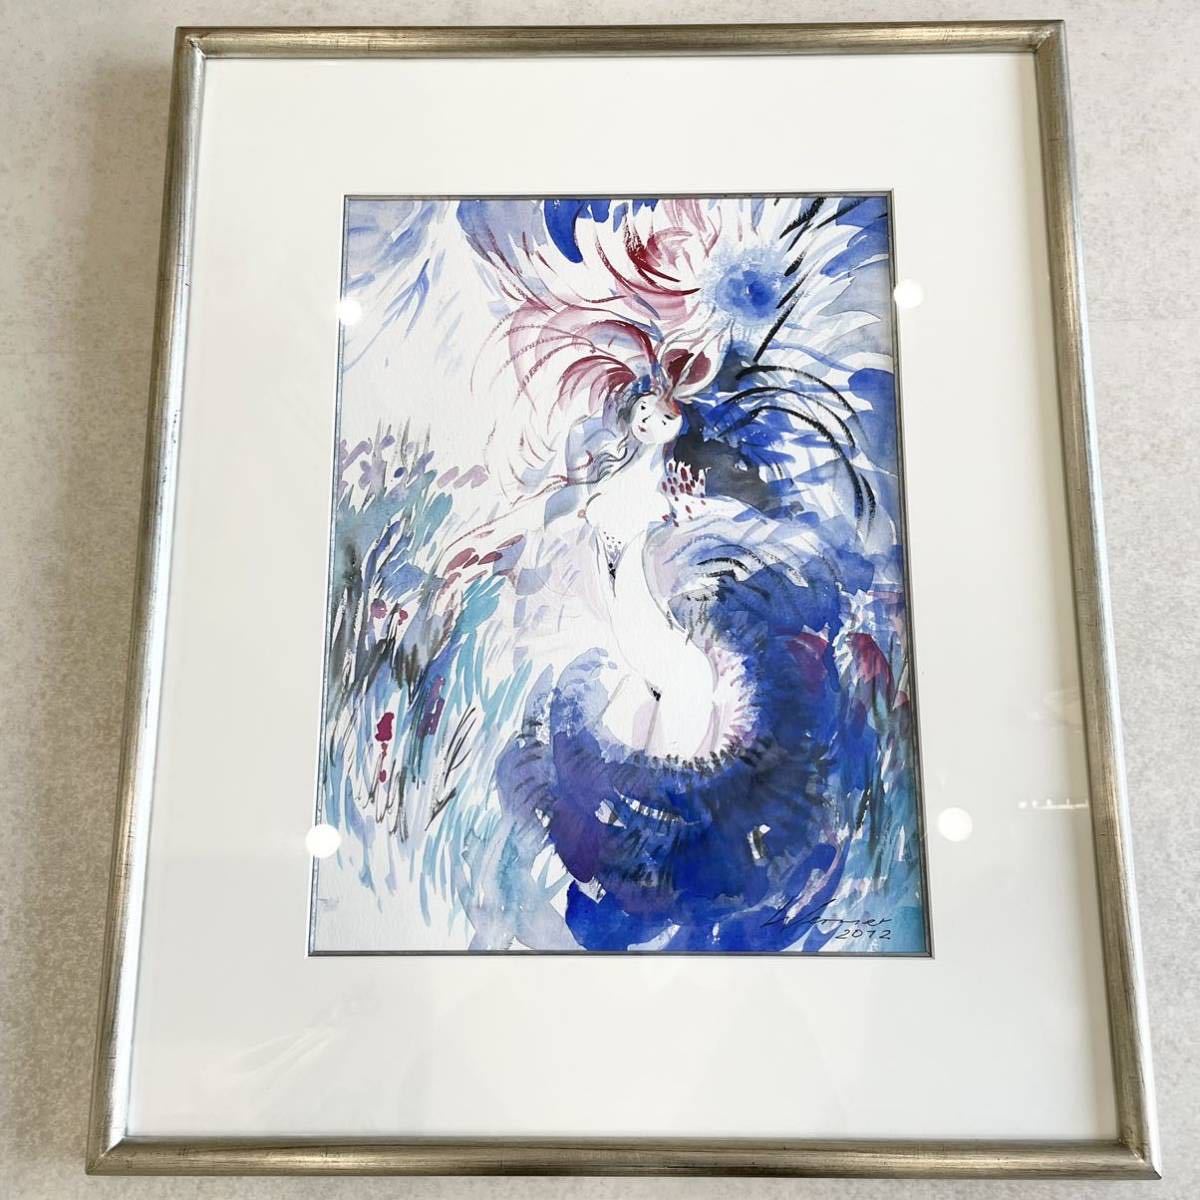 ◇Hand-painted! Meissen's leading painter◇ Heinz Werner Dancer Hand-painted pencil drawing, watercolor painting, framed item, 47 x 34.5 cm, painting, Ceramics, Western Ceramics, Meissen